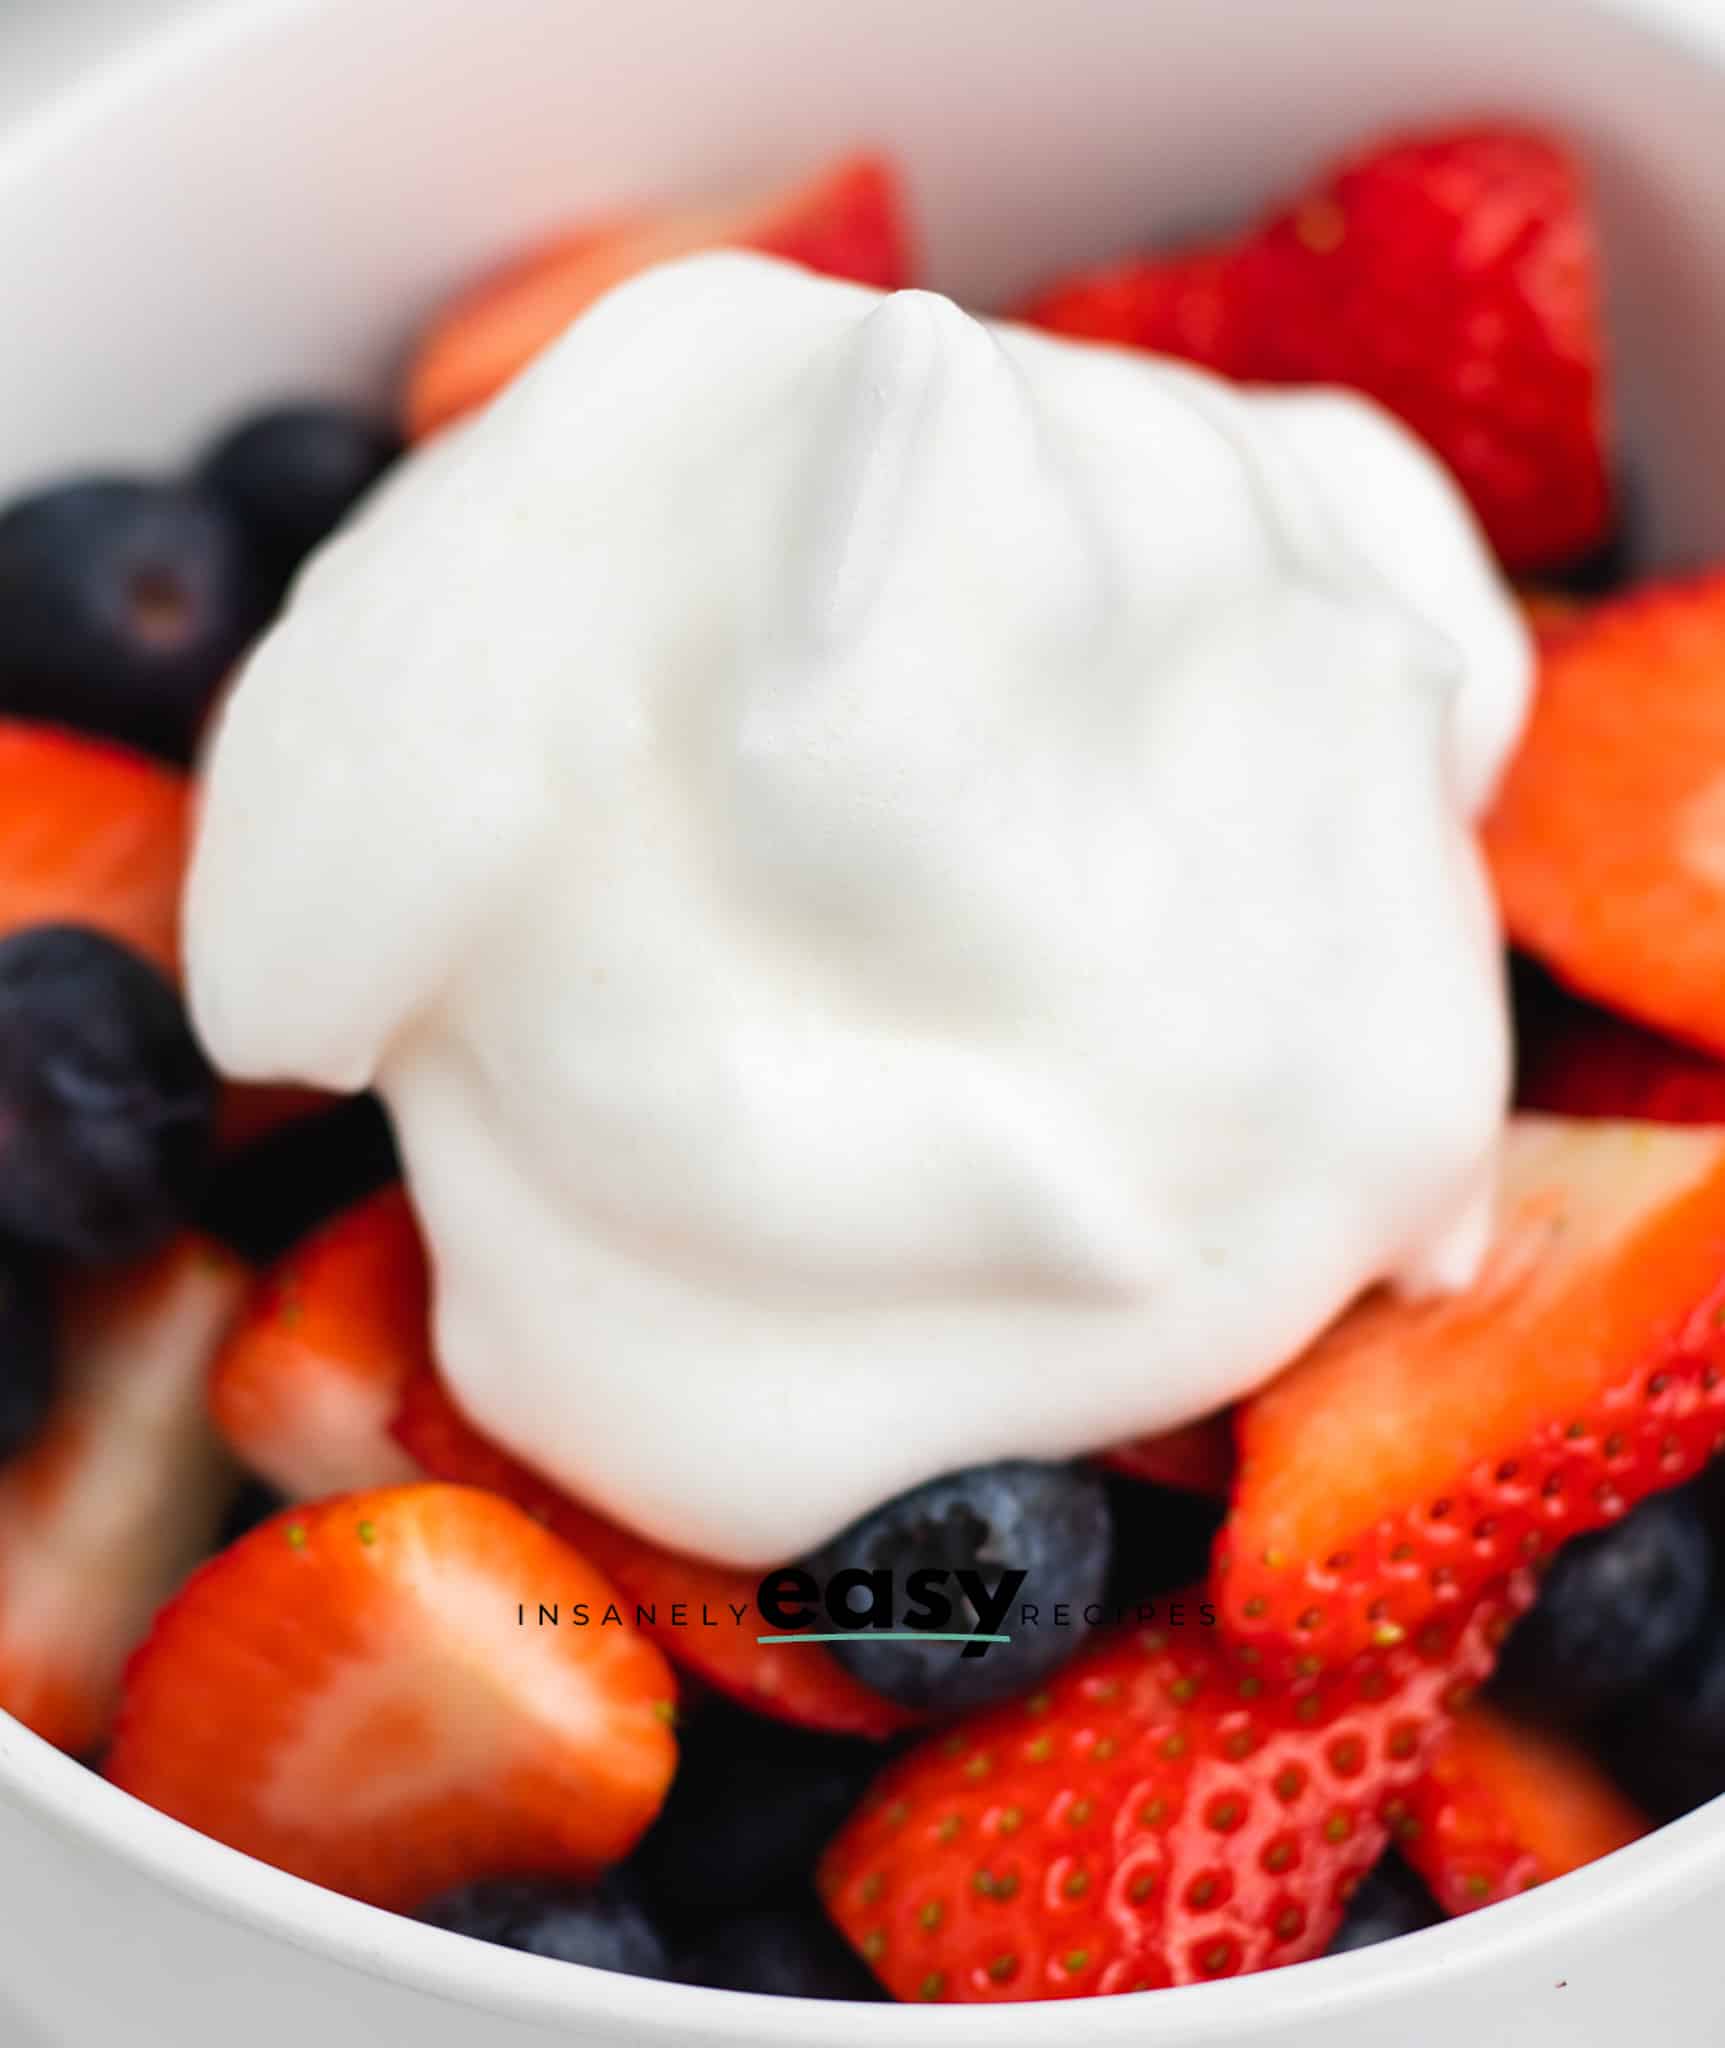 Closeup photo of a bowl of chopped berries, like blueberries and strawberries, topped with a dollop of aquafaba whipped cream.